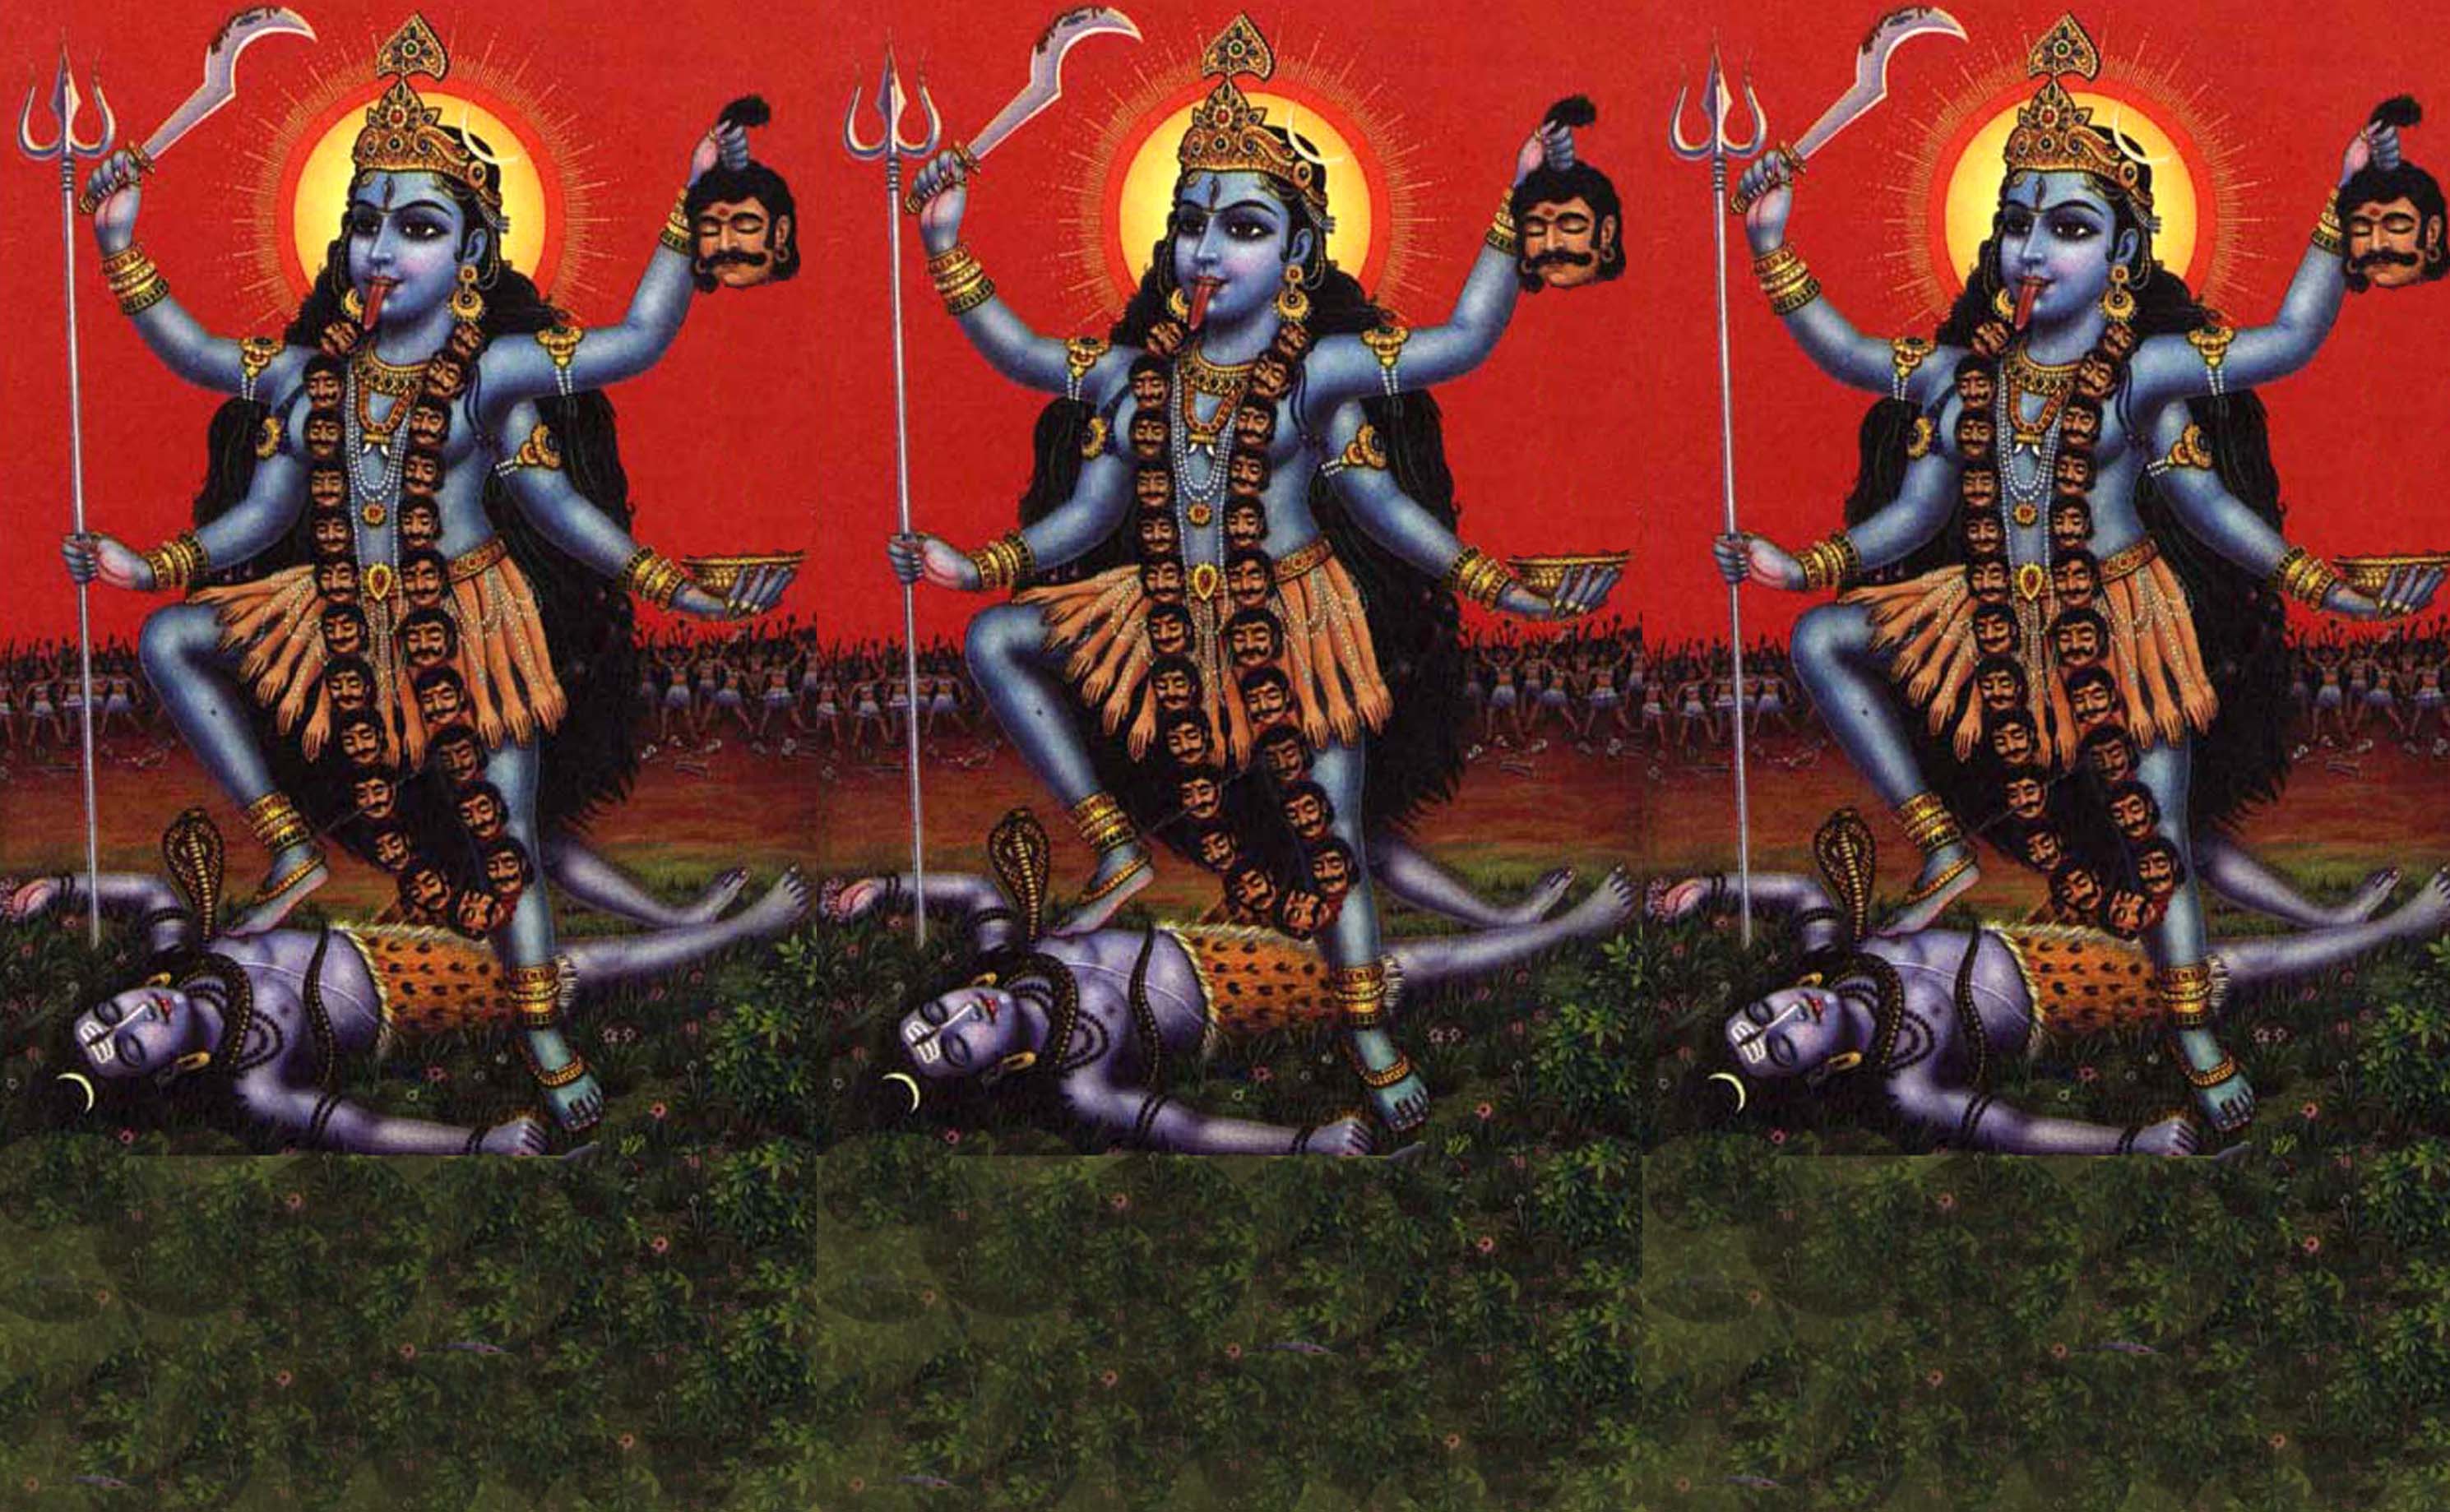 Kali is depicted here with blue skin and a garland of severed heads. She holds a khopesh (saber) and a severed head. Her tongue is obscenely long to catch the blood that drains from the heads. She stands on the body of a sleeping shiva.